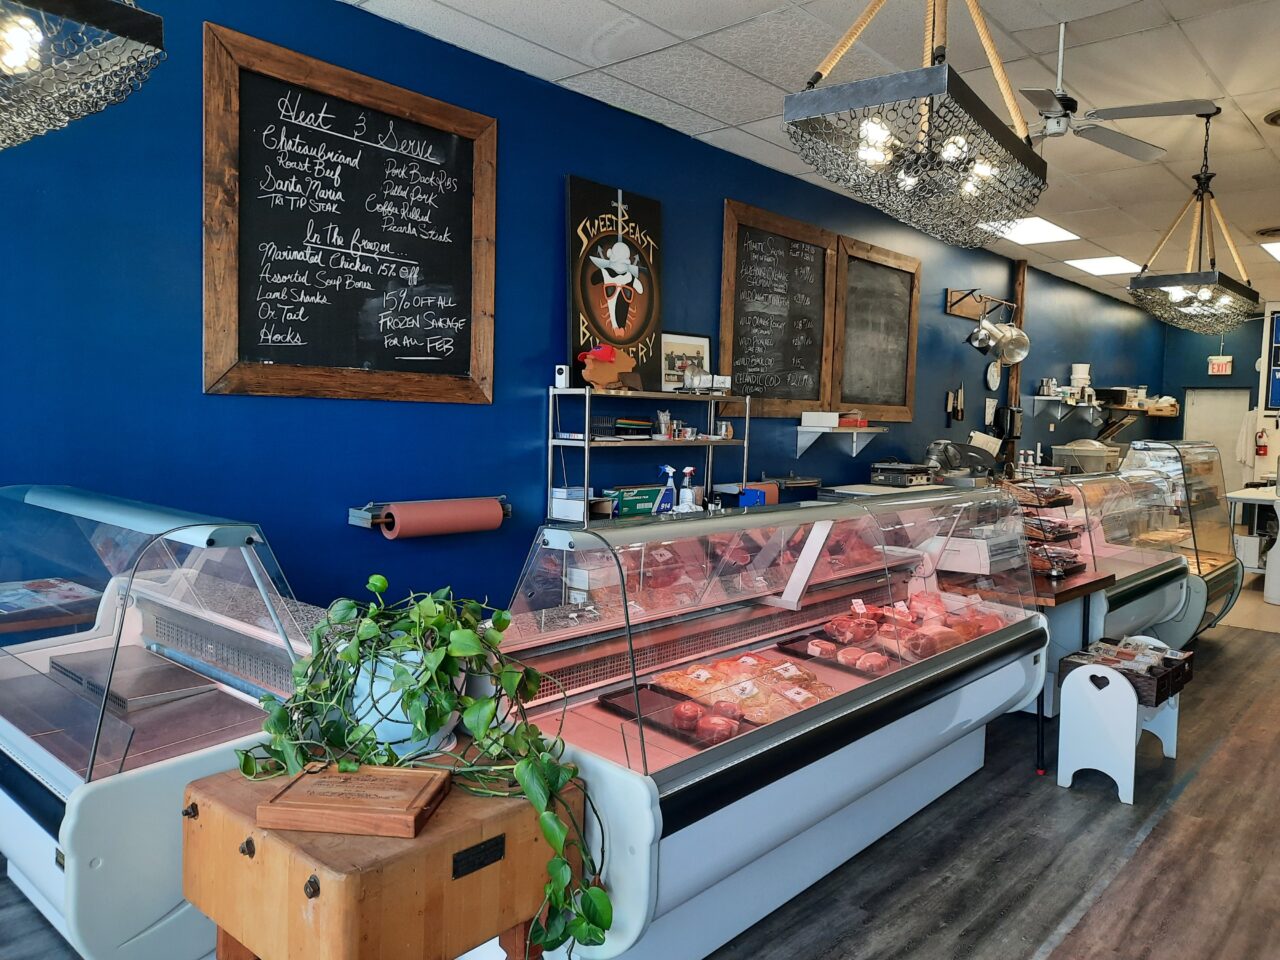 Butcher shop counter full of product in front of blue wall with chalk board sign menus